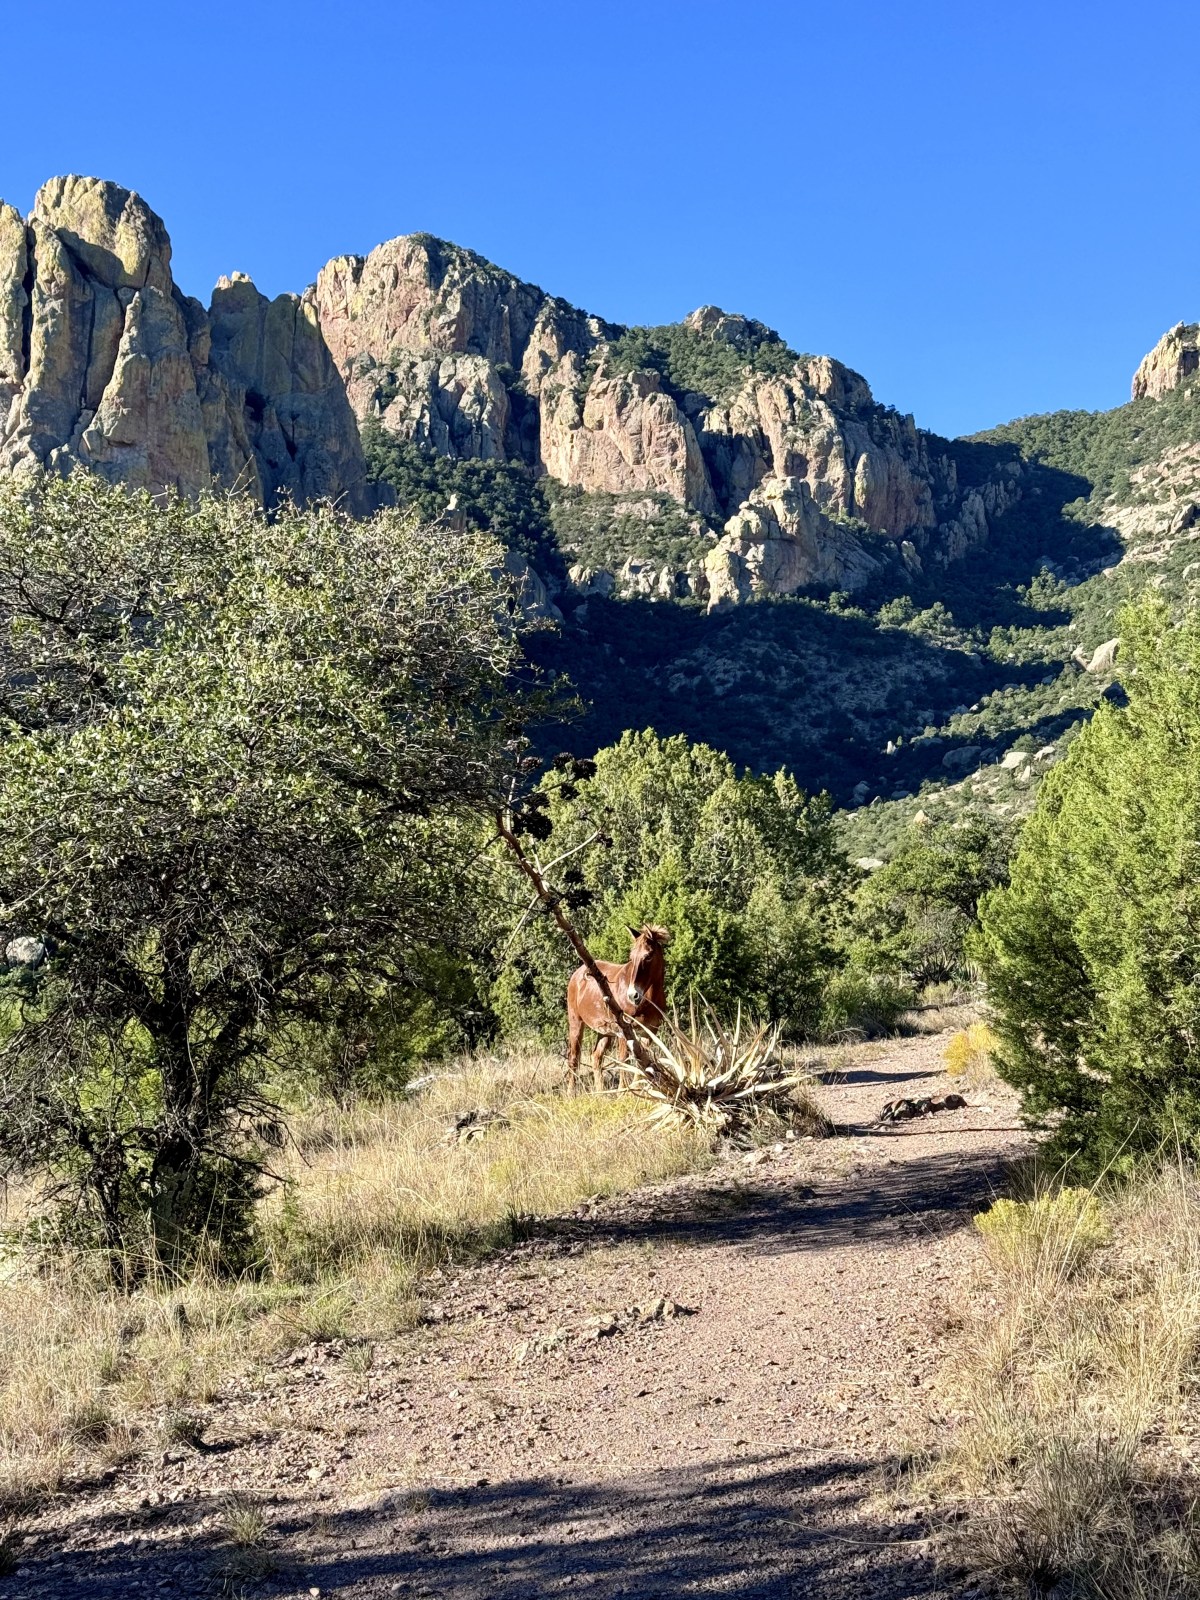 Silver Peak Trail at Cave Creek Canyon in the Chiricahua Mountains of Coronado National Forest in Portal, Arizona